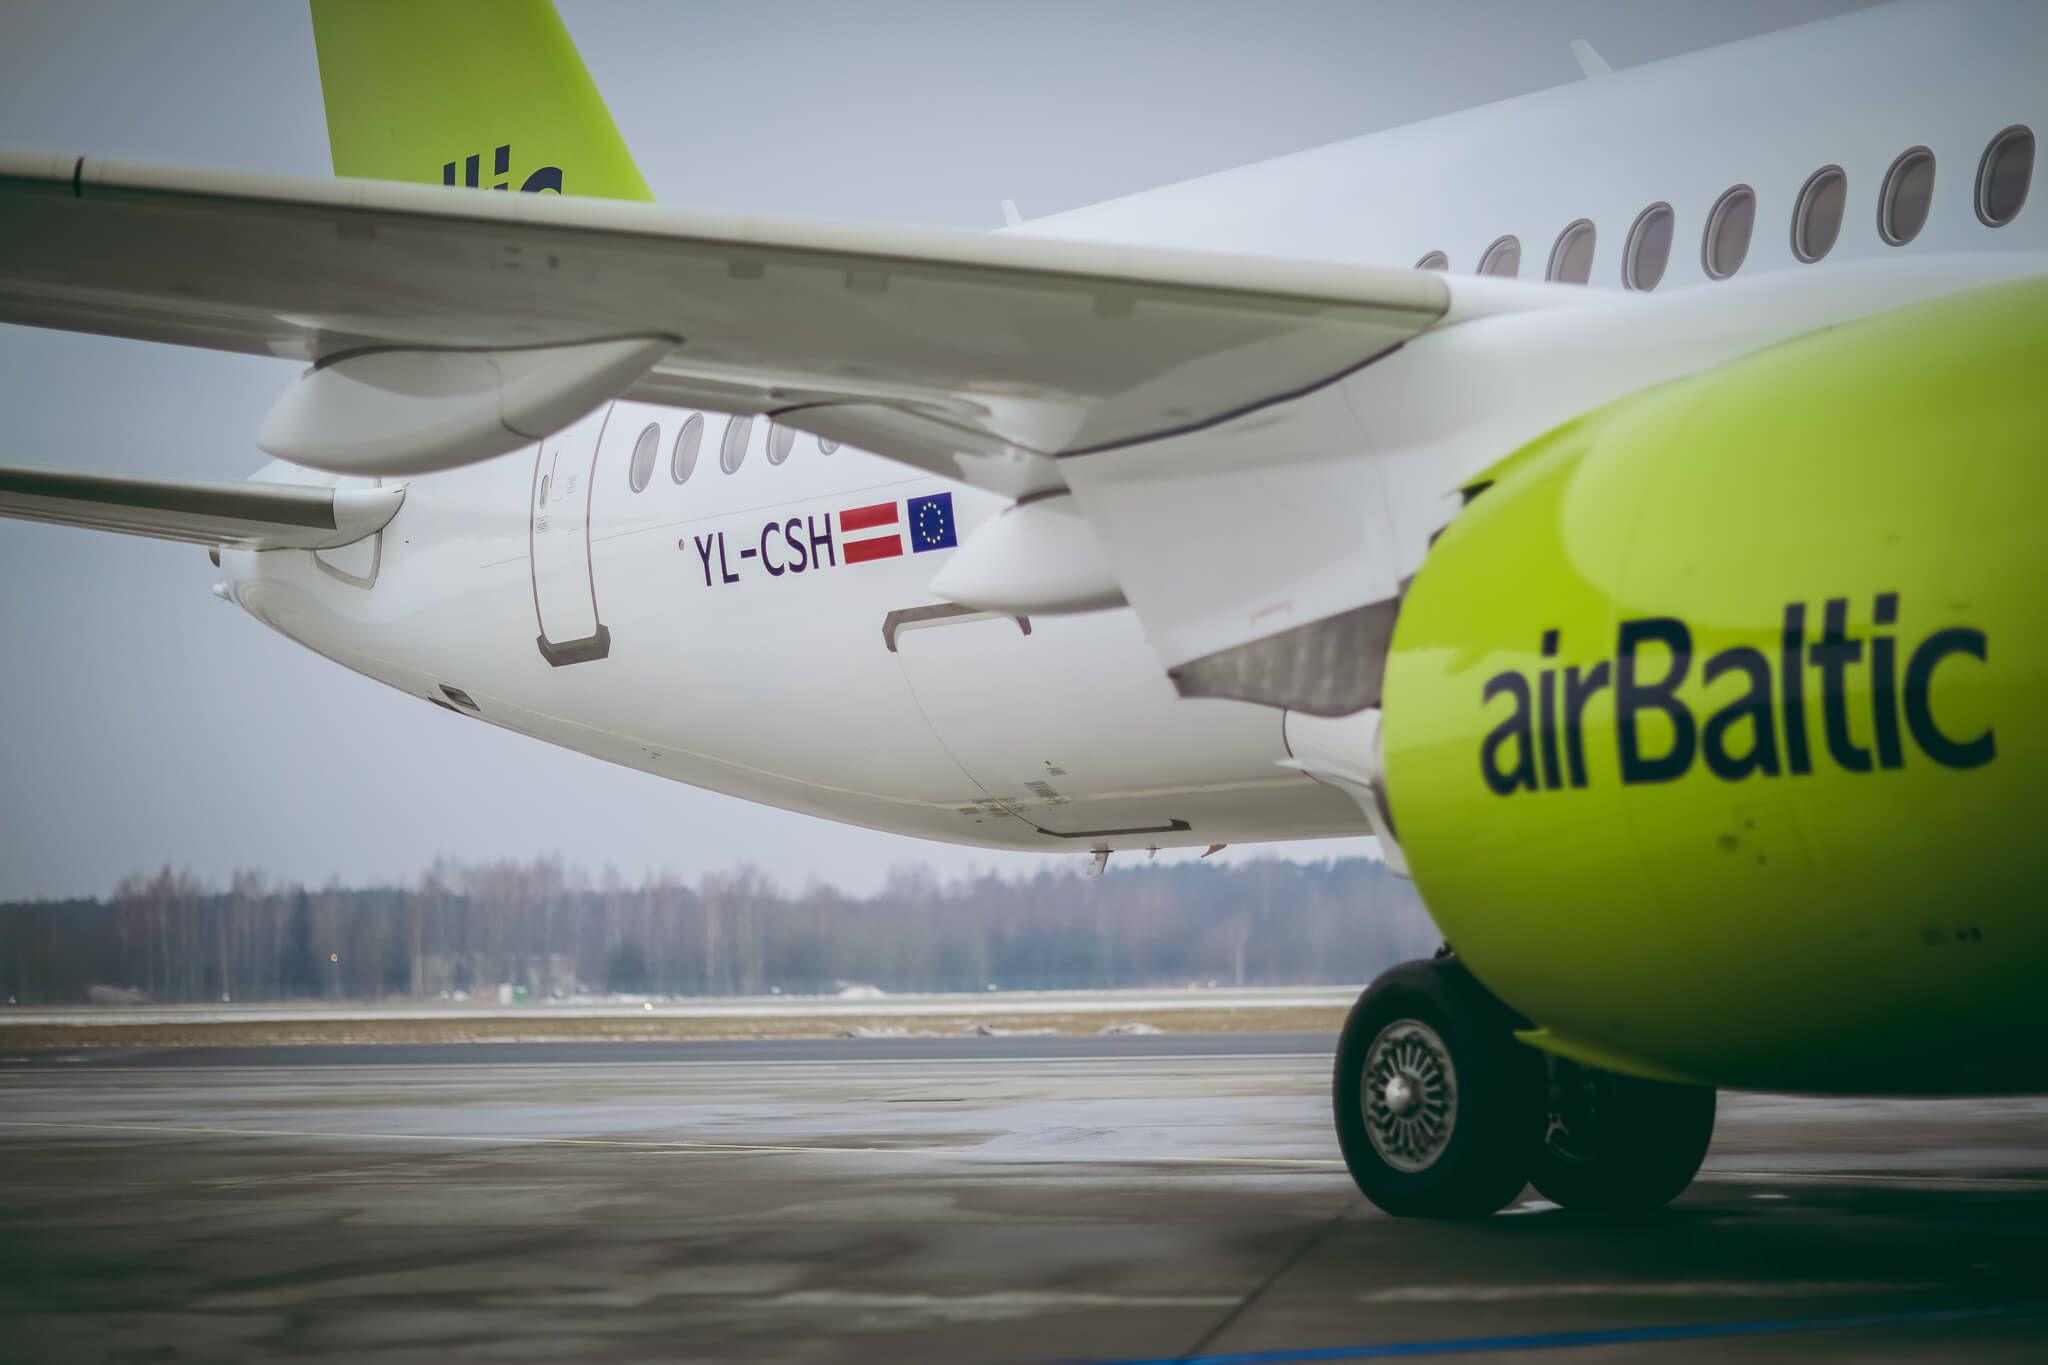 airBaltic reports February traffic